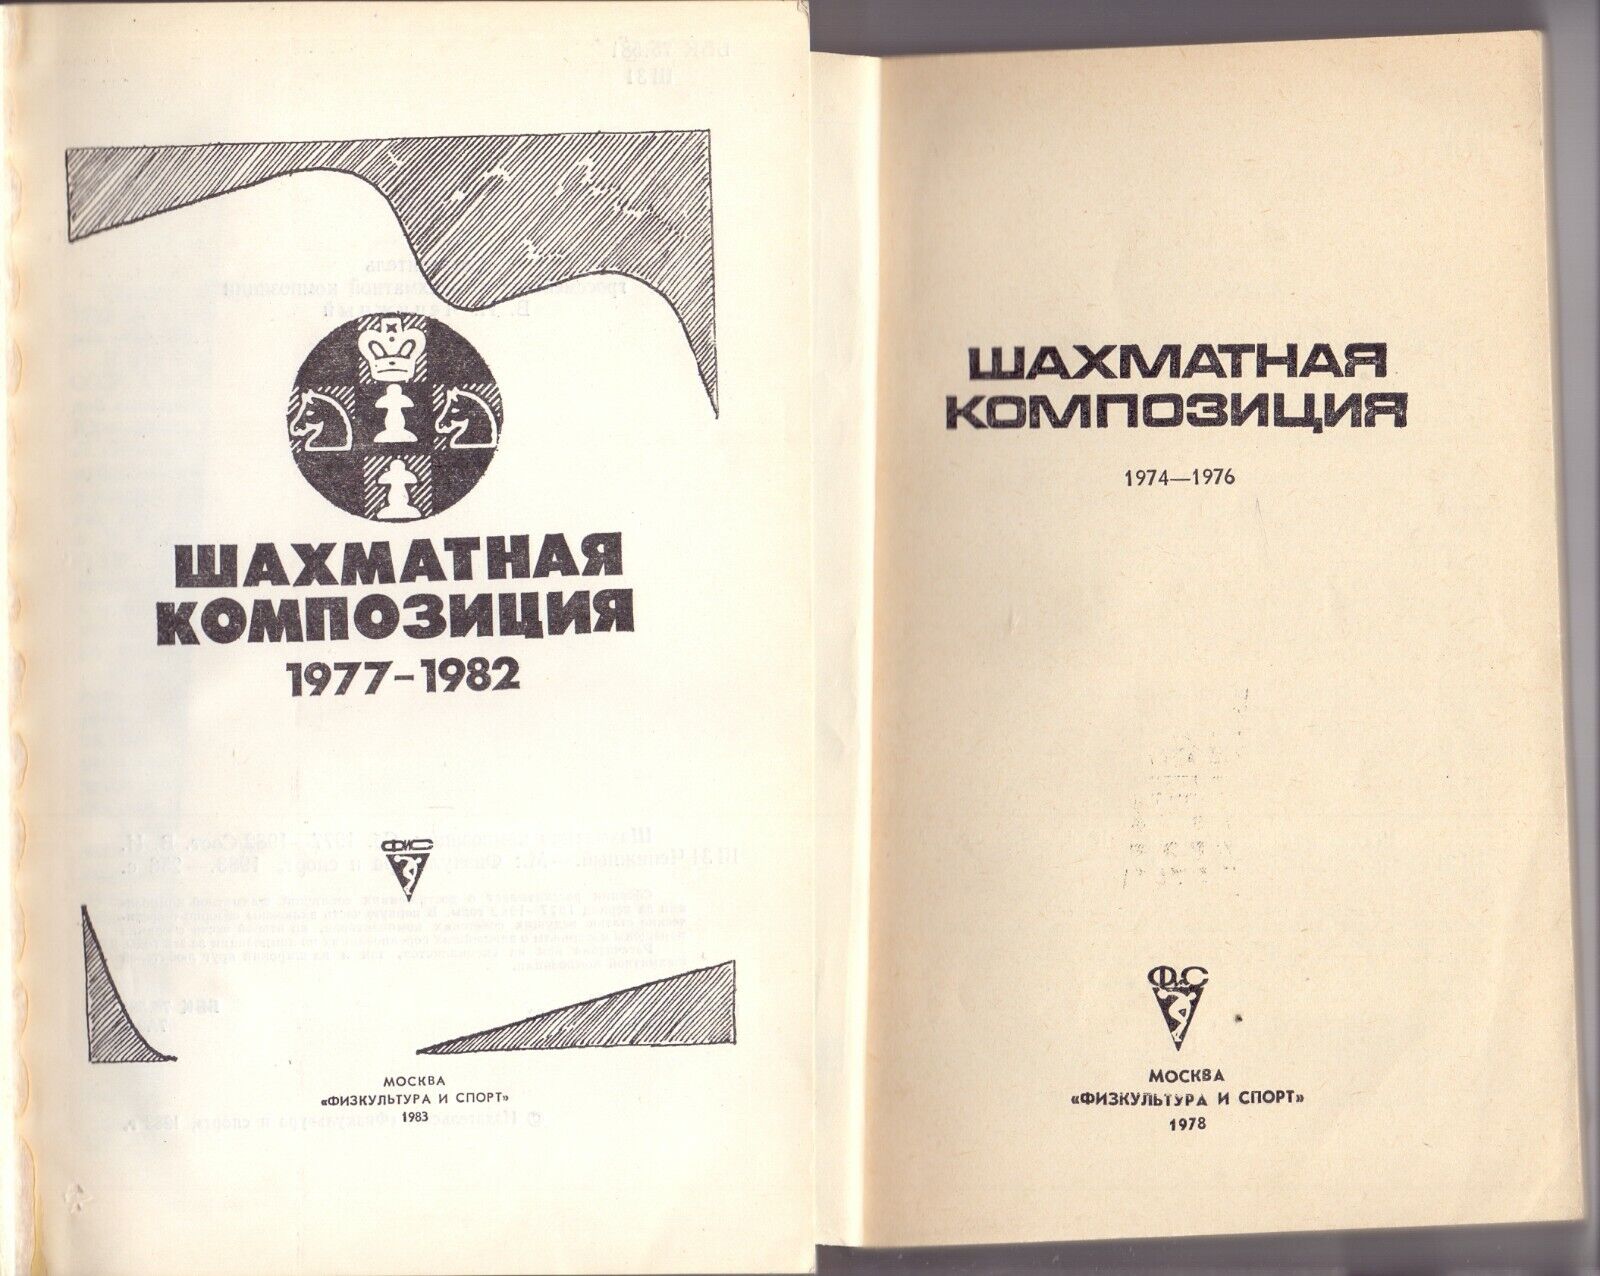 11249.Complete Set of 2 Russian chess books: Chess Composition 1974- 1976. 1977-1982.